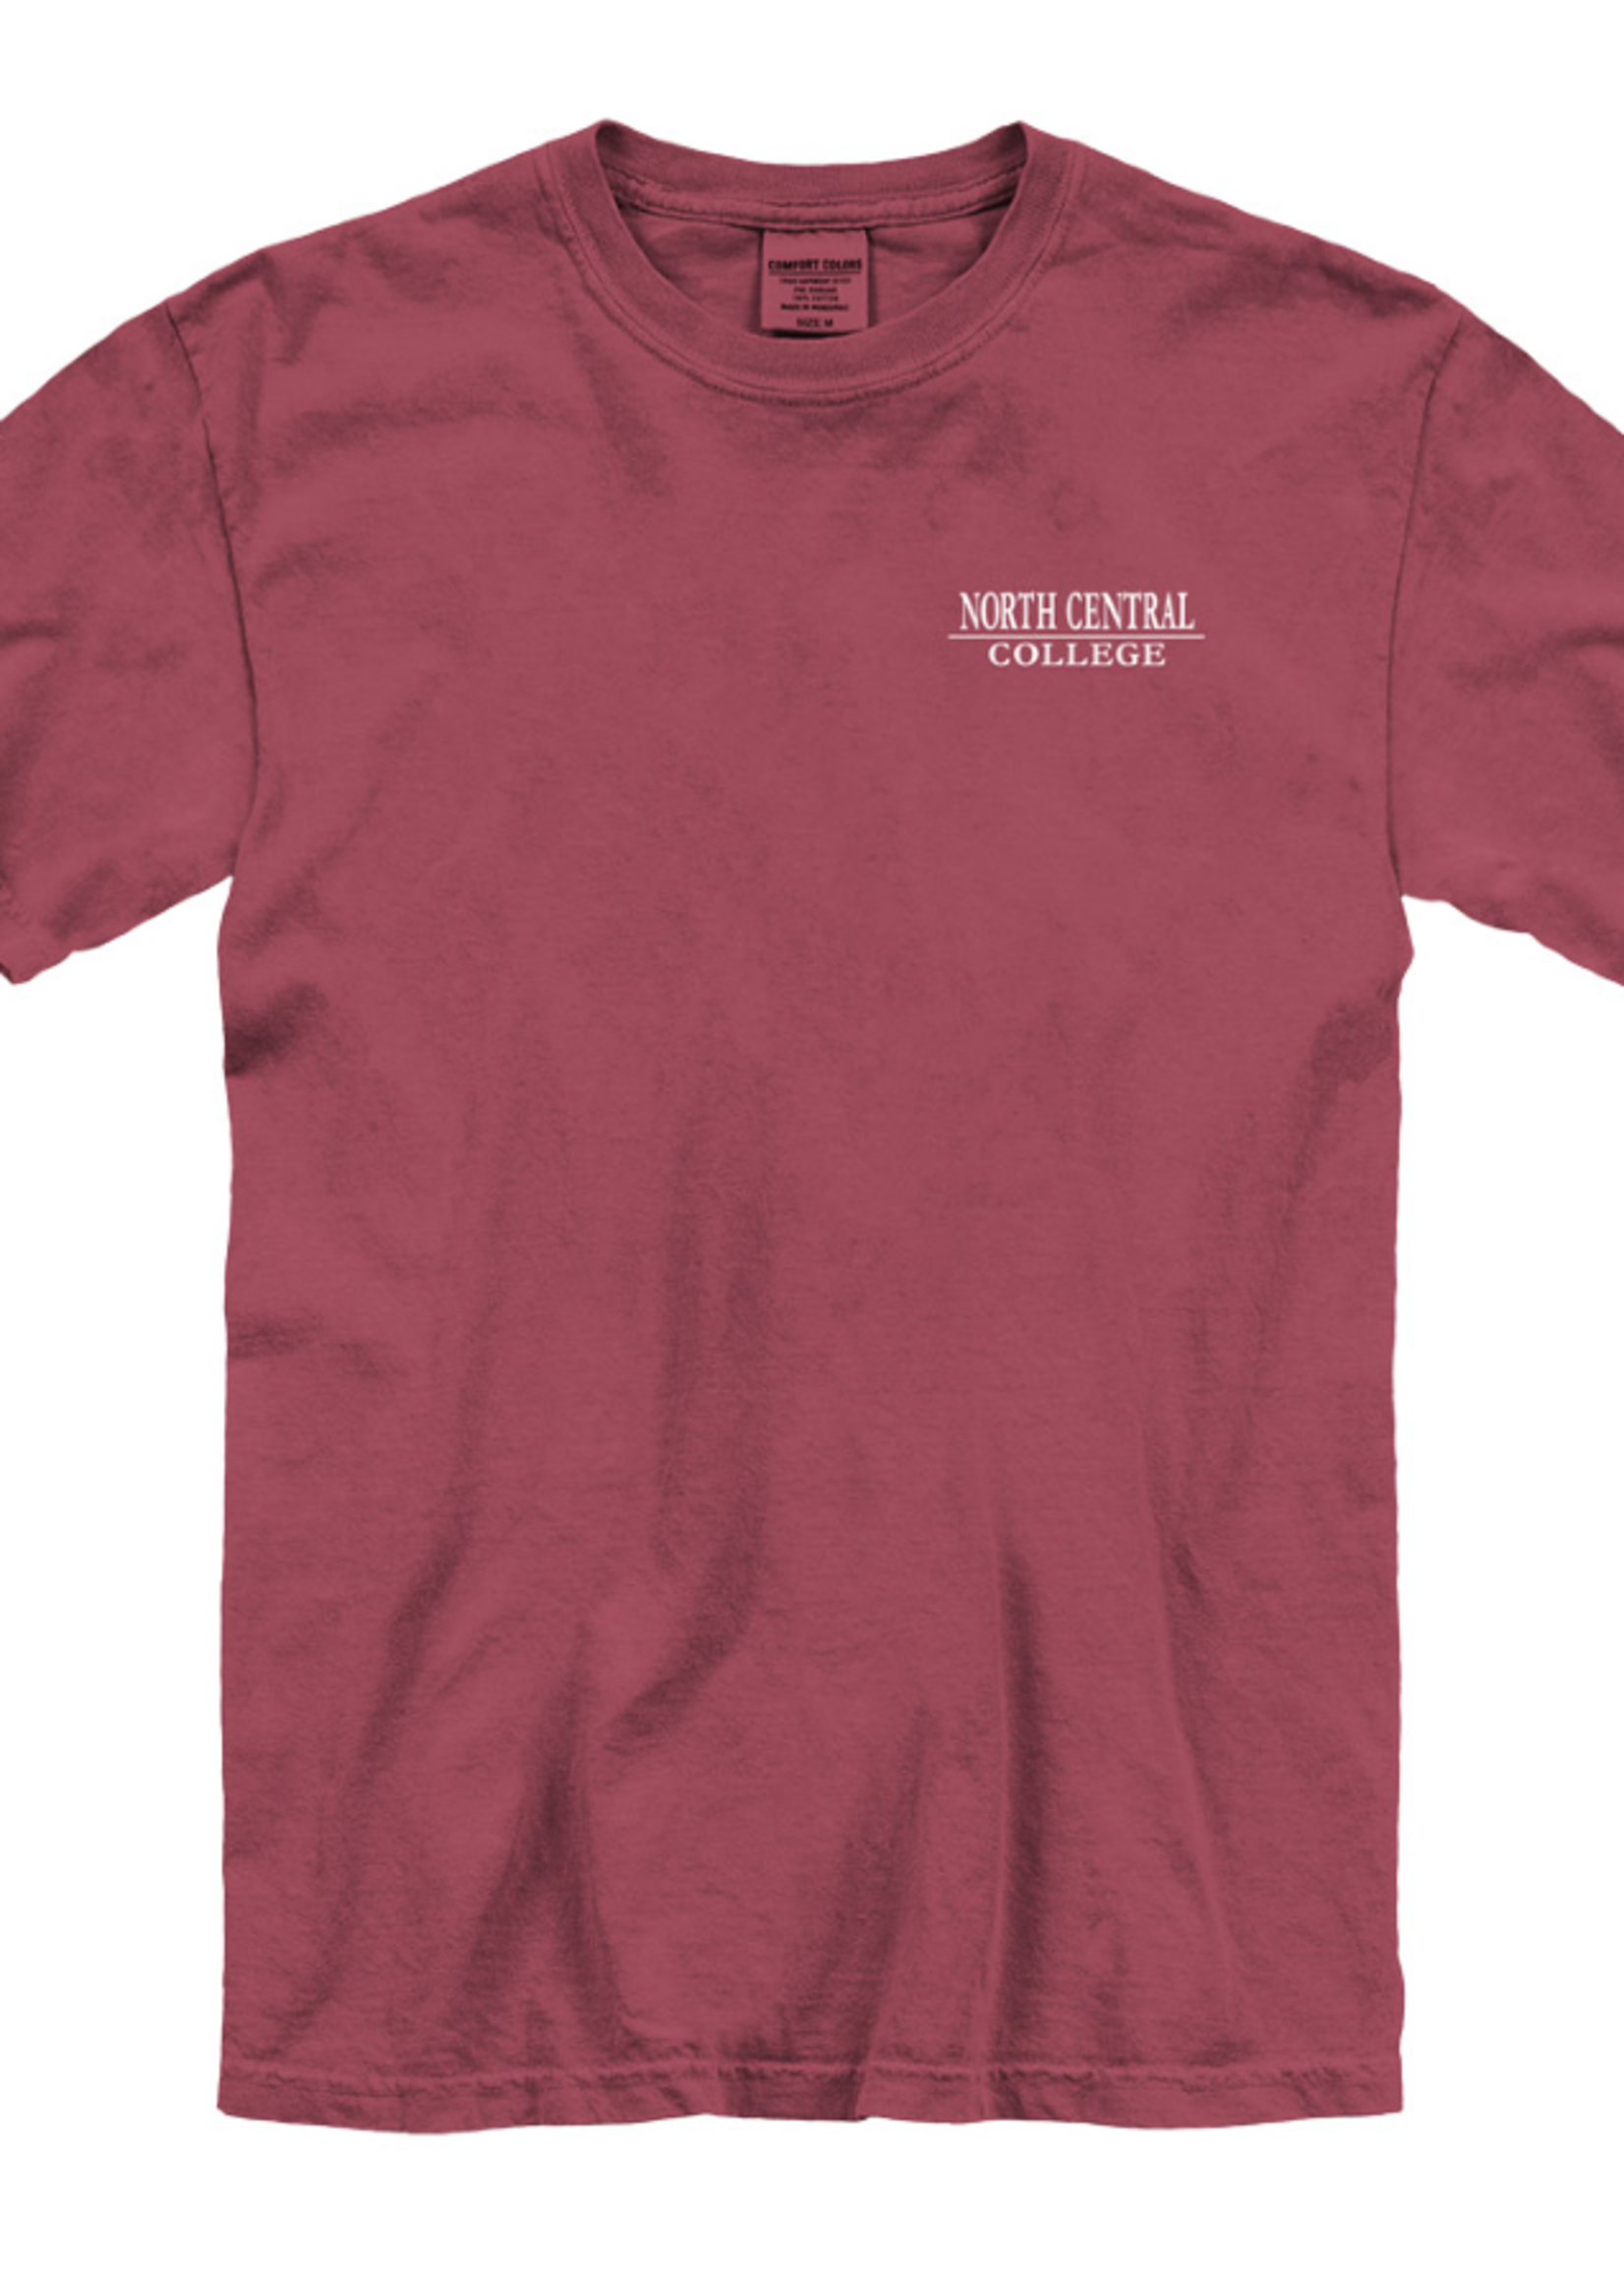 Unisex  Comfort Color Tee shirt w/ Front and back print